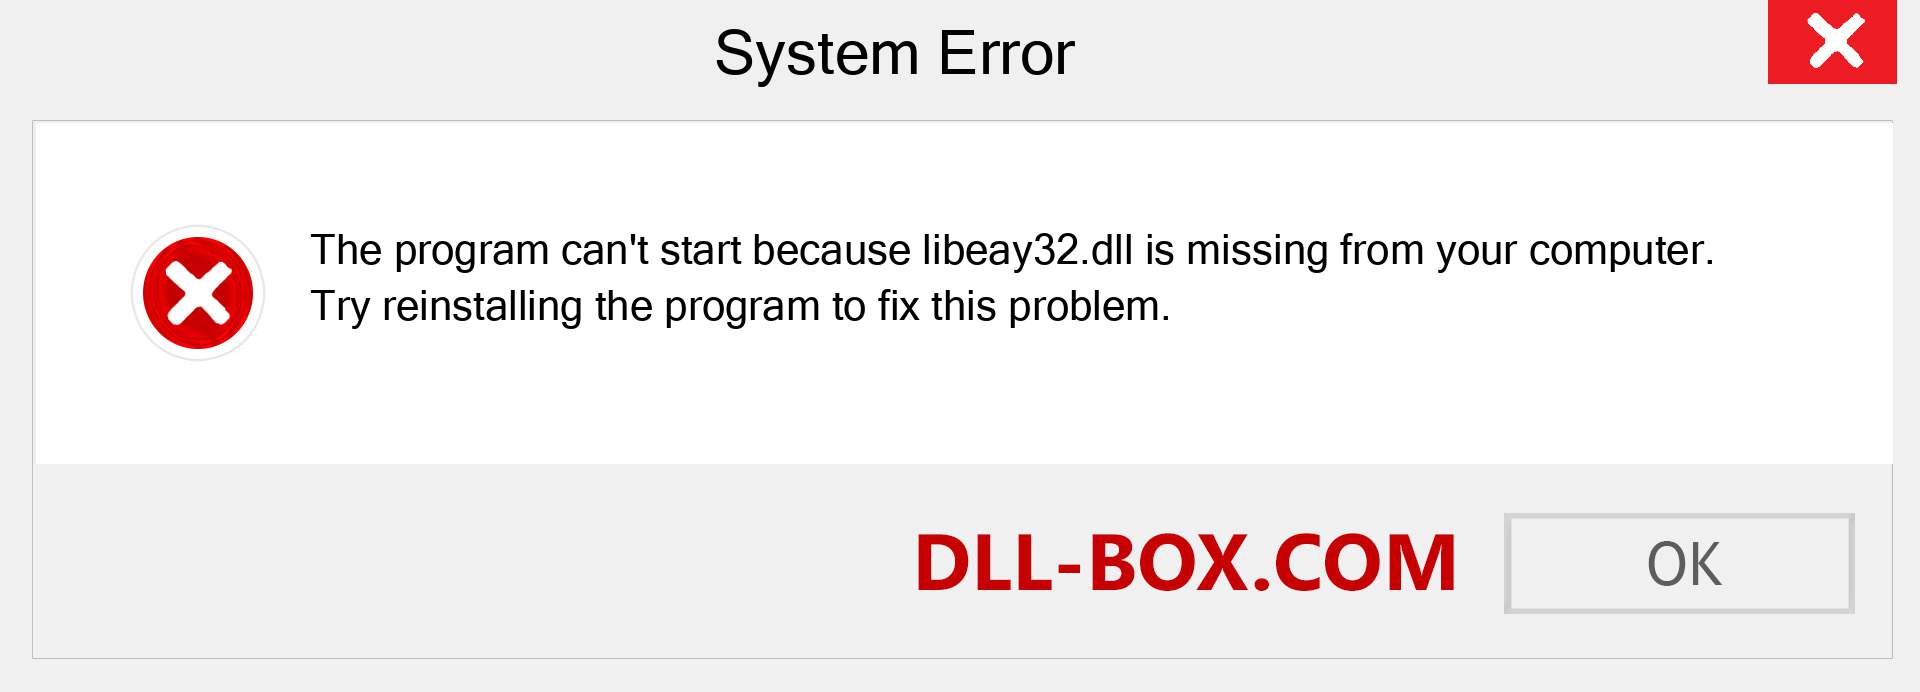  libeay32.dll file is missing?. Download for Windows 7, 8, 10 - Fix  libeay32 dll Missing Error on Windows, photos, images